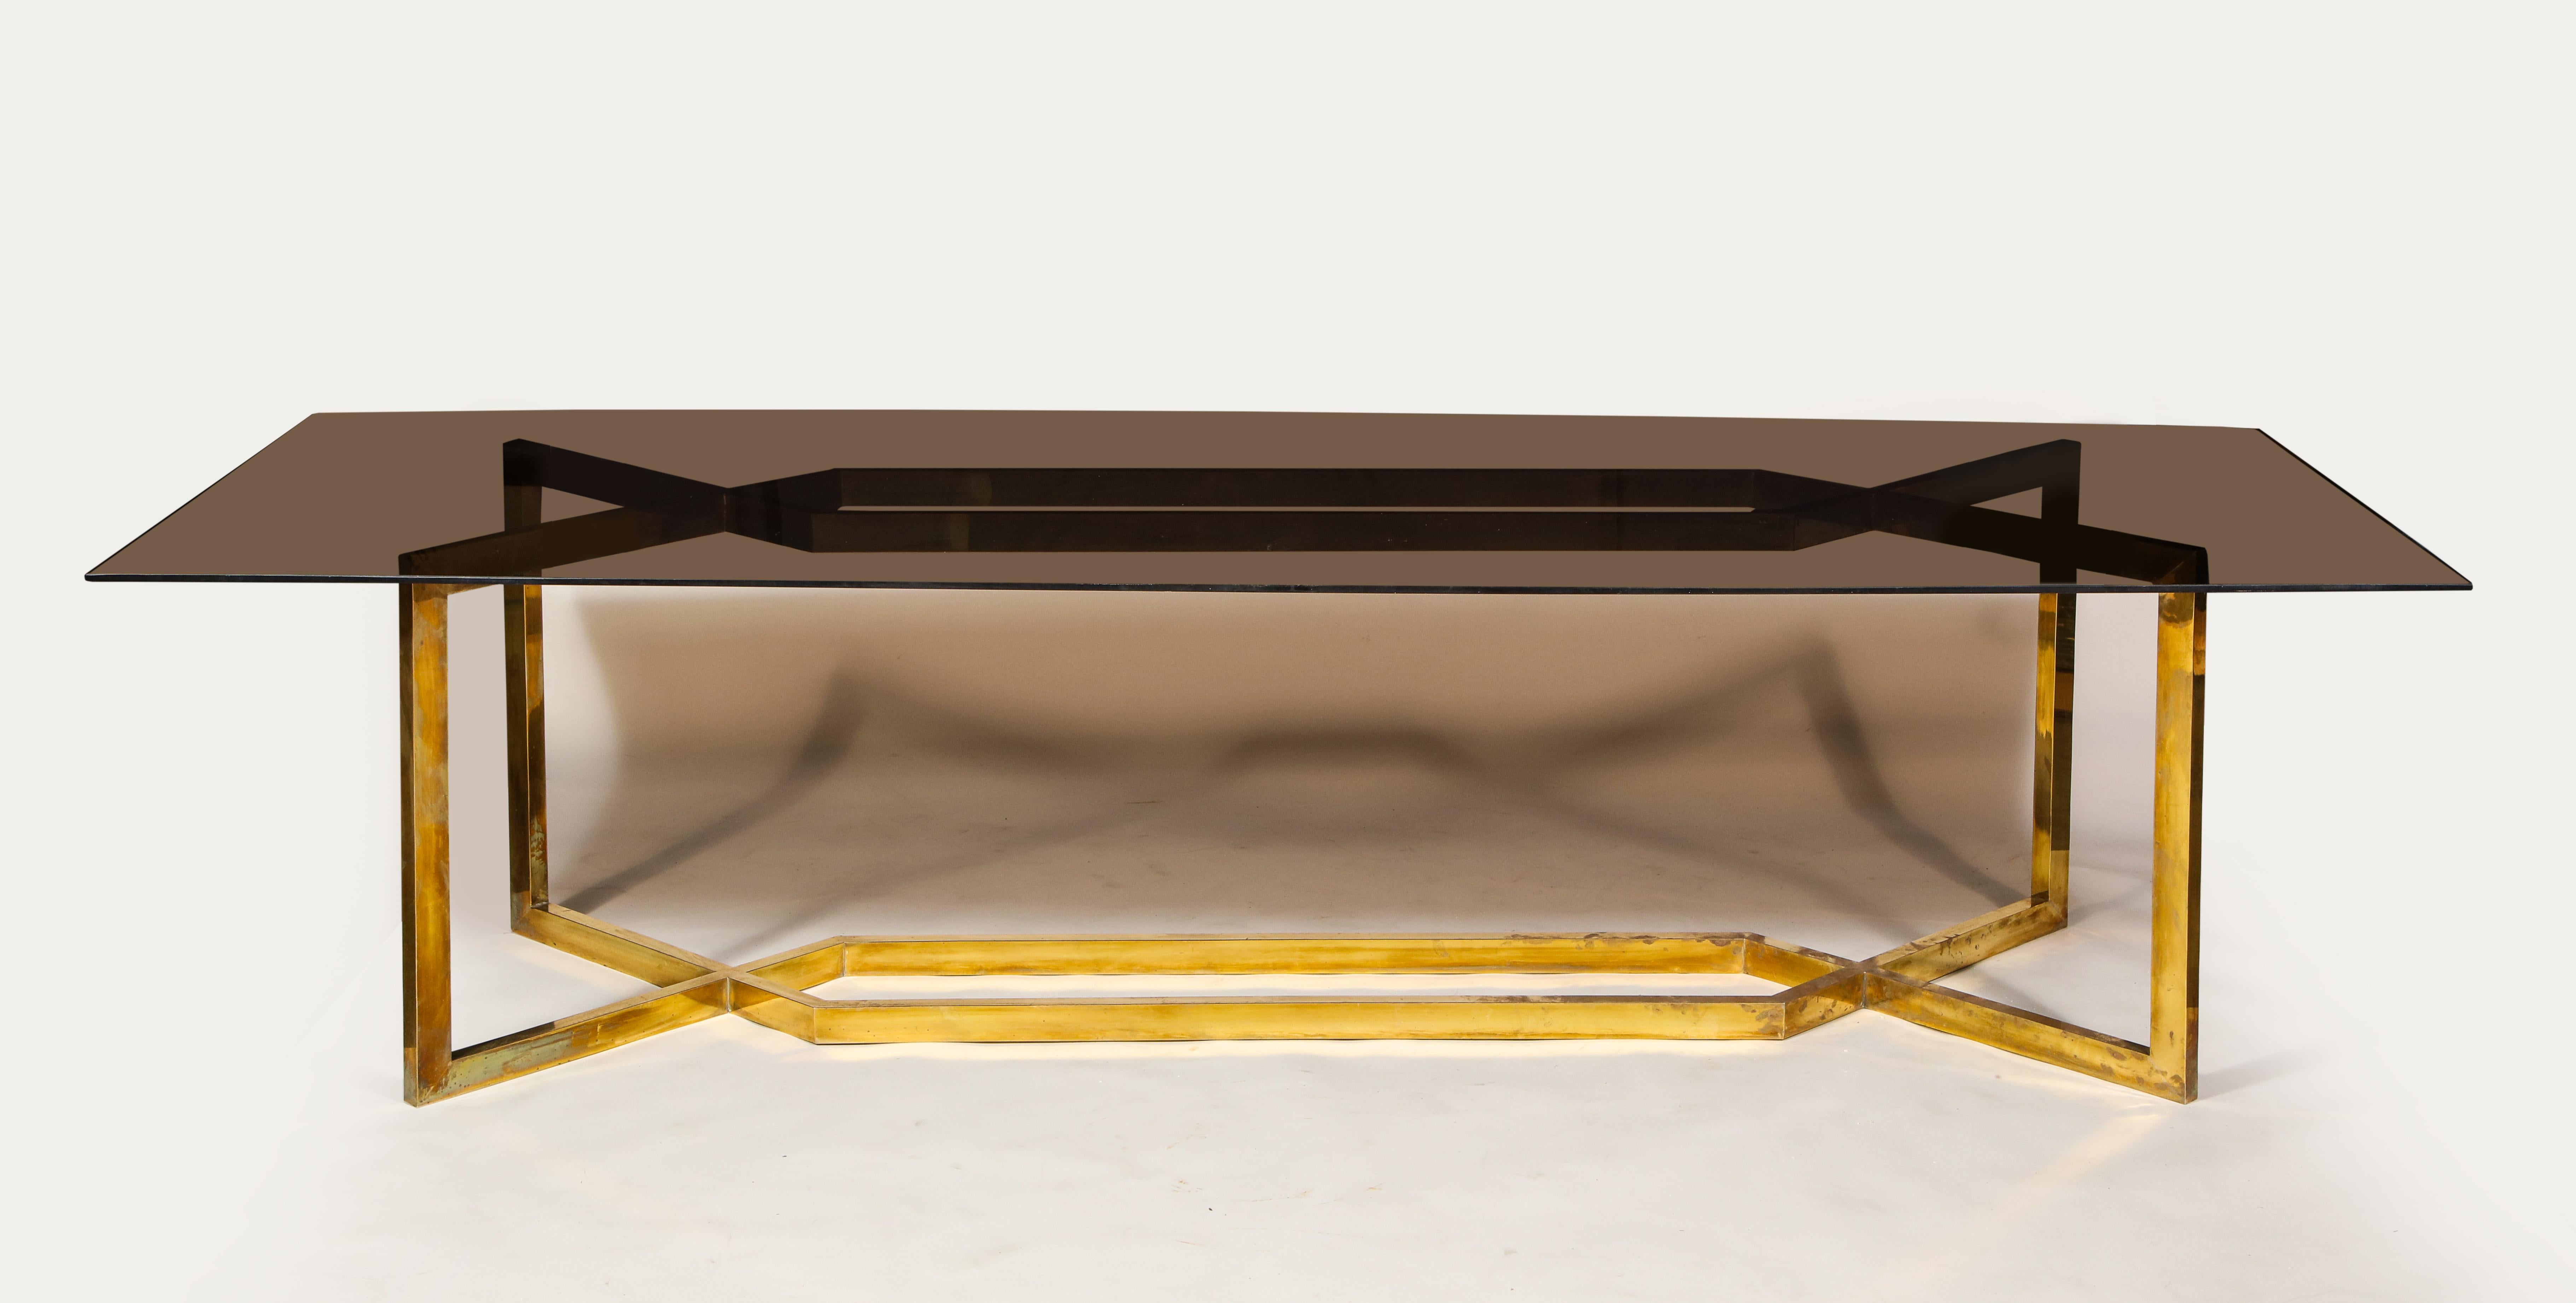 20th century Paul Legeard brass dining table smoked glass top, Italy, 1970

Beautiful Paul Legeard large dining or conference table. Architectural base shape. Shown here with smoked glass. Incredible large scale piece. Imported from France